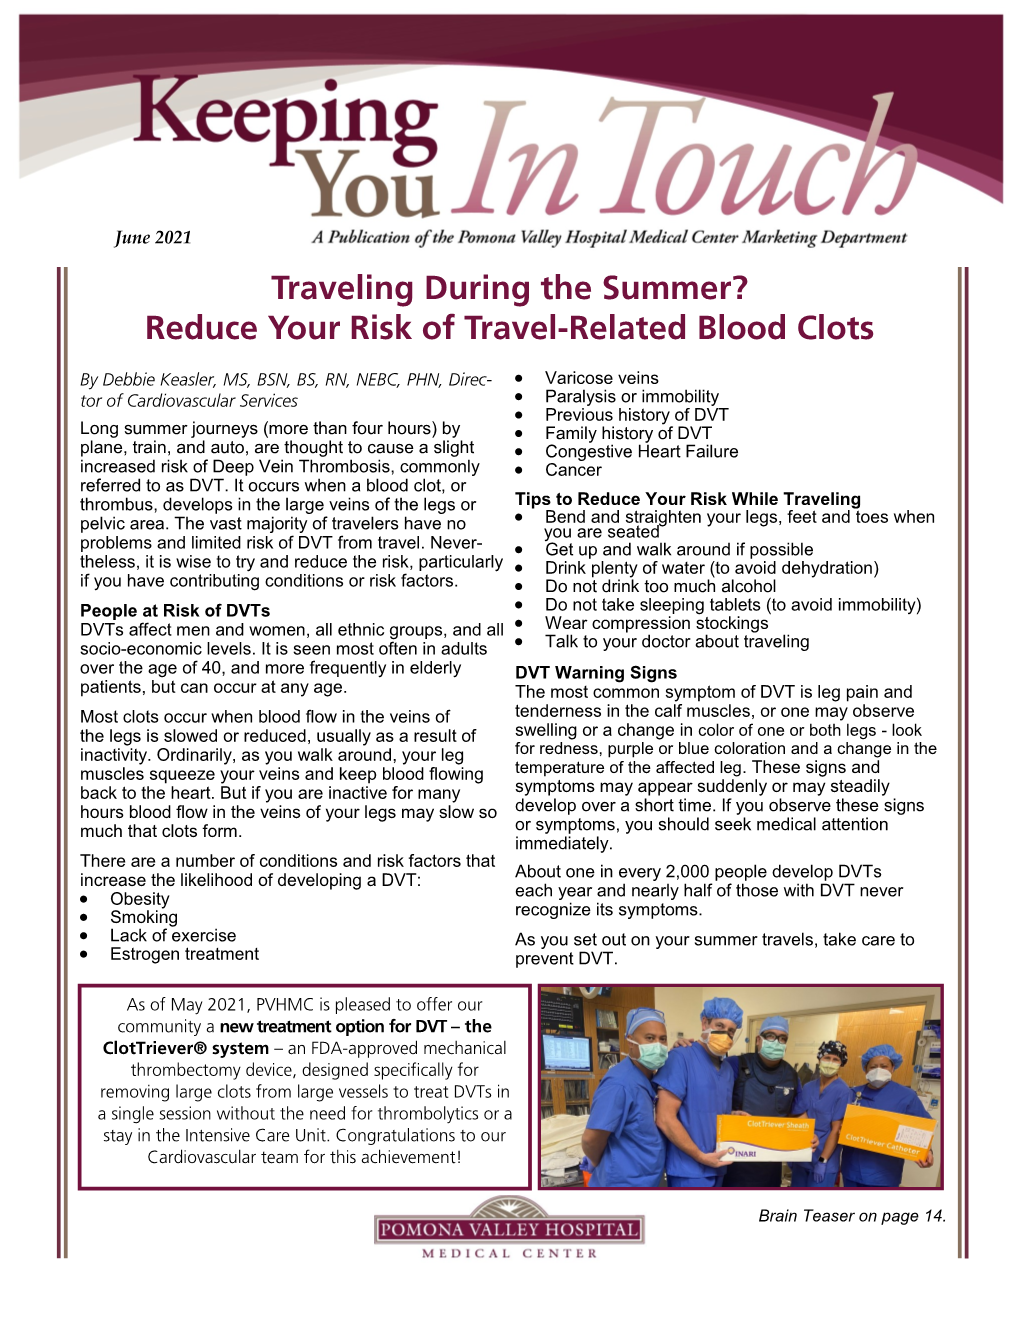 Reduce Your Risk of Travel-Related Blood Clots